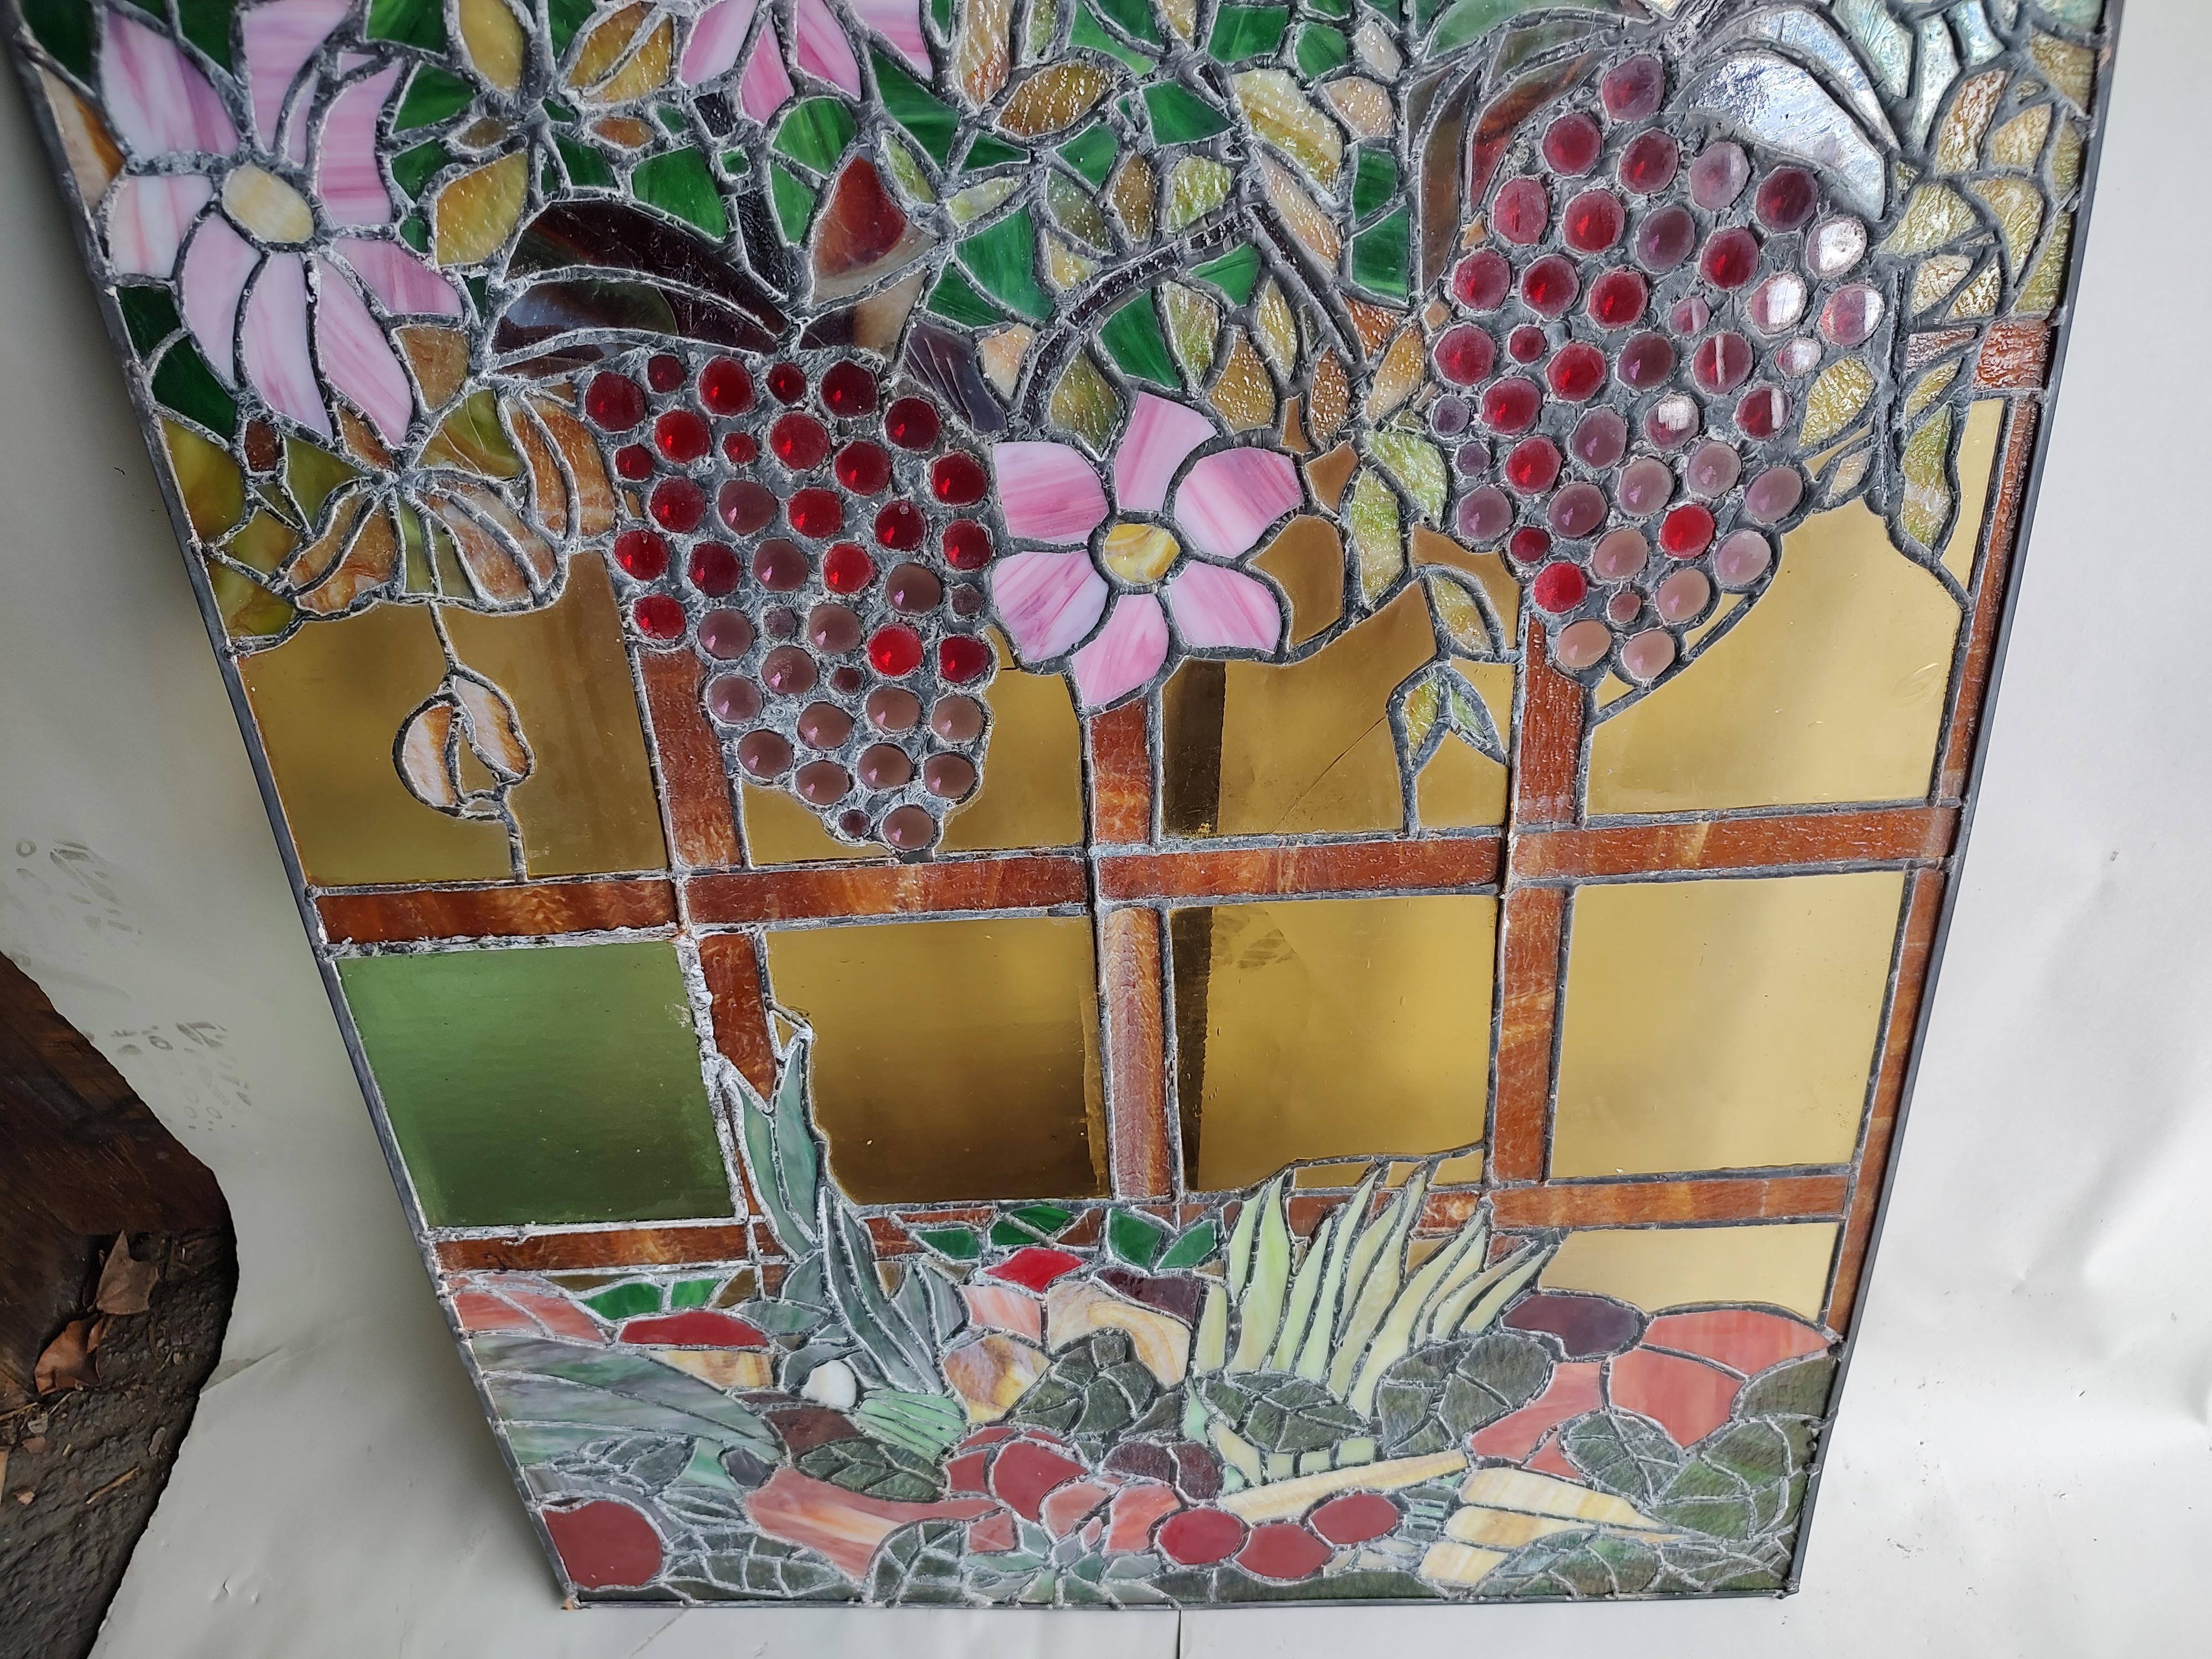 Spectacular window panels by Rainbow Studios NY. 
Windows were created for a house in Nyack NY which overlooks the Hudson River. Amazing craftsmanship and style in these panels with fruit and vegetables. This listing is for one panel, which has a